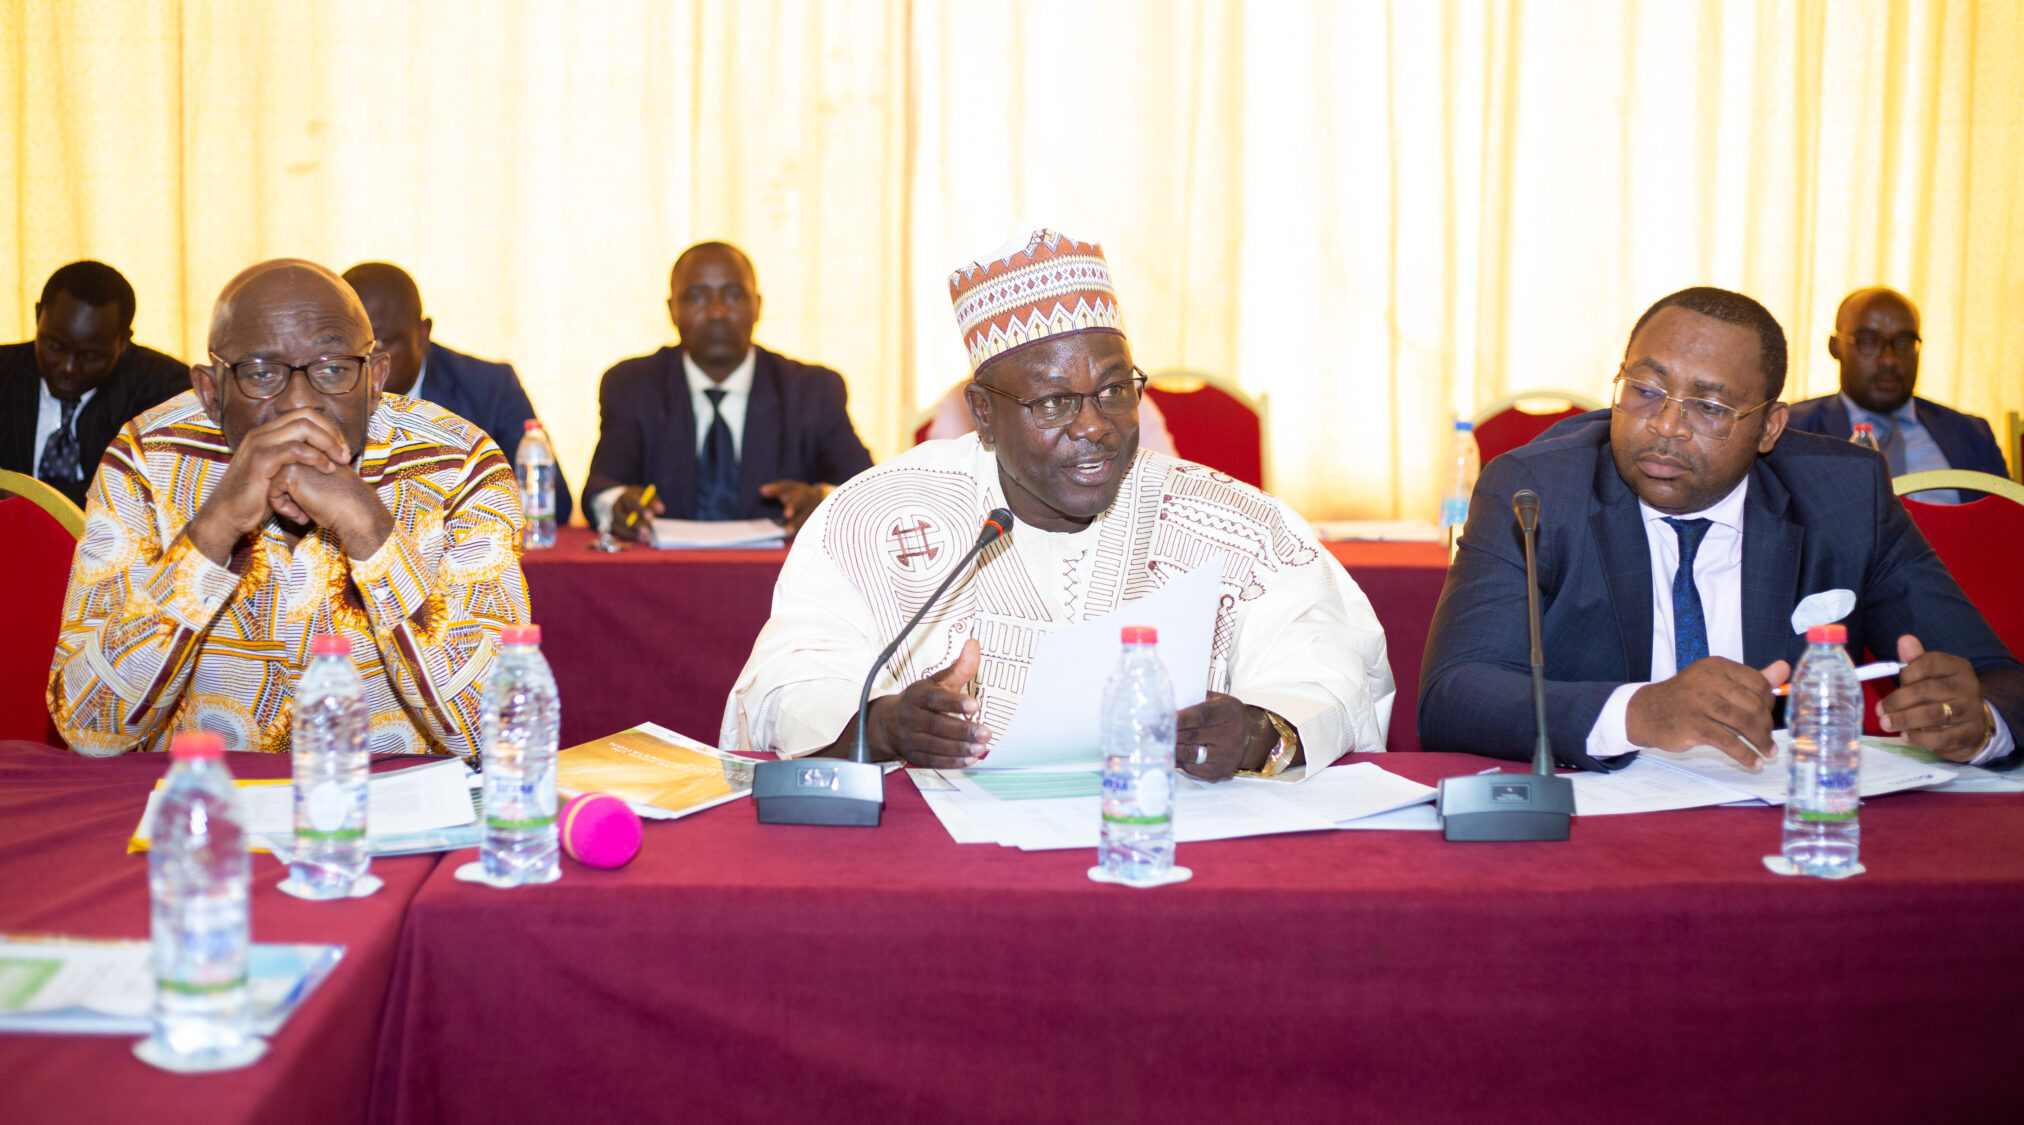 presentative-of-the-Cameroonian-Minister-of-Agriculture-and-Rural-Development-leads-the-first-meeting-of-the-Sustainable-Cocoa-Committee